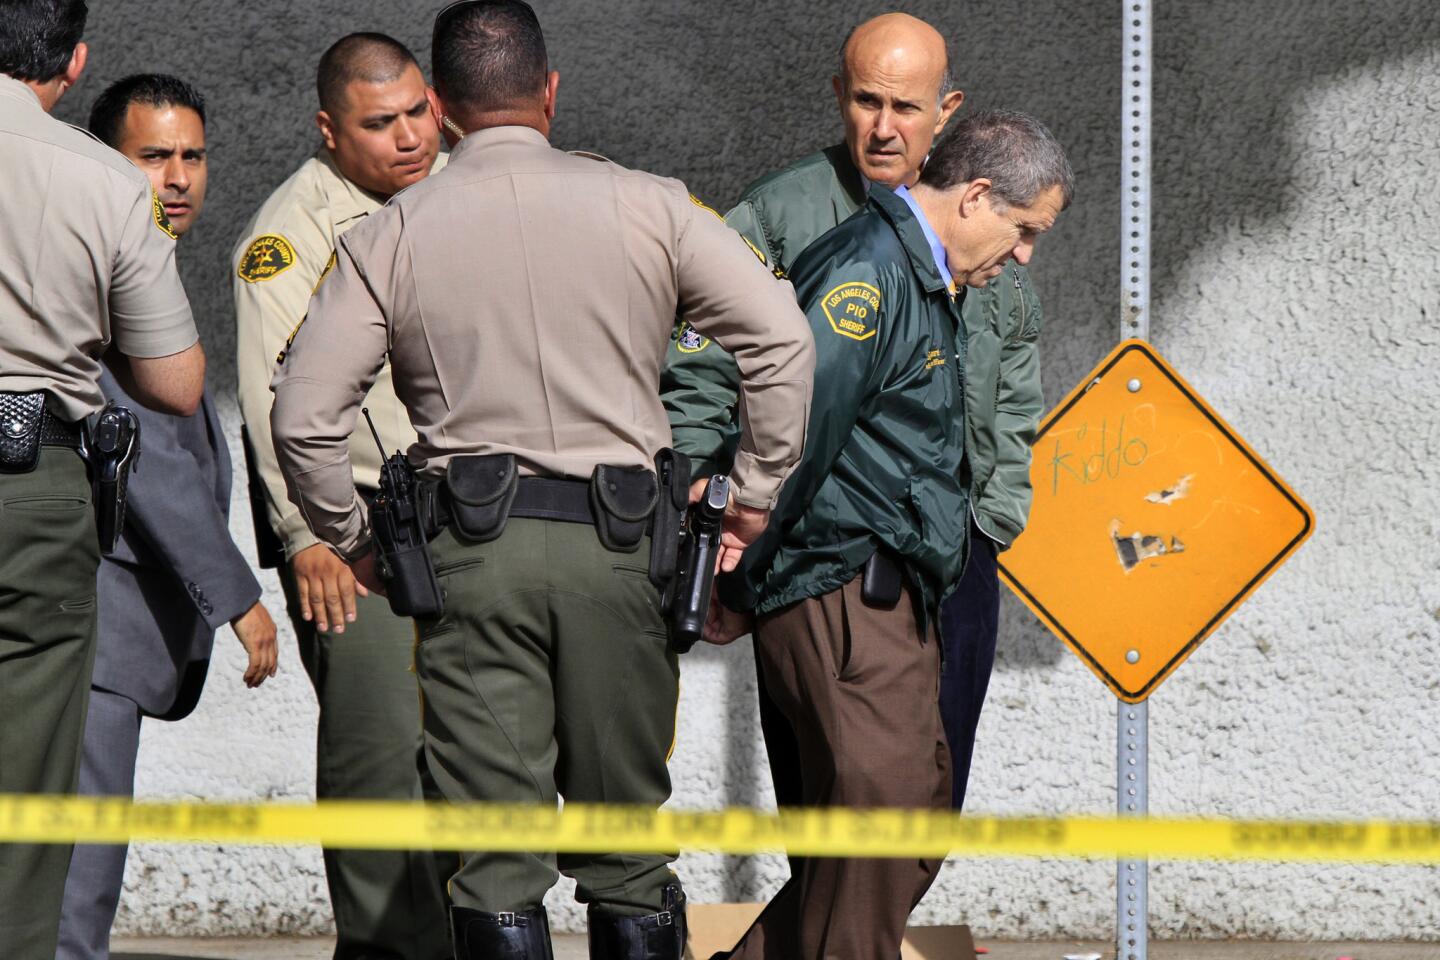 Sheriff Lee Baca visits an accident scene where a deputy was struck and critically injured by a car as he investigated a stranded or abandoned car along the Gold Line tracks in East Los Angeles.